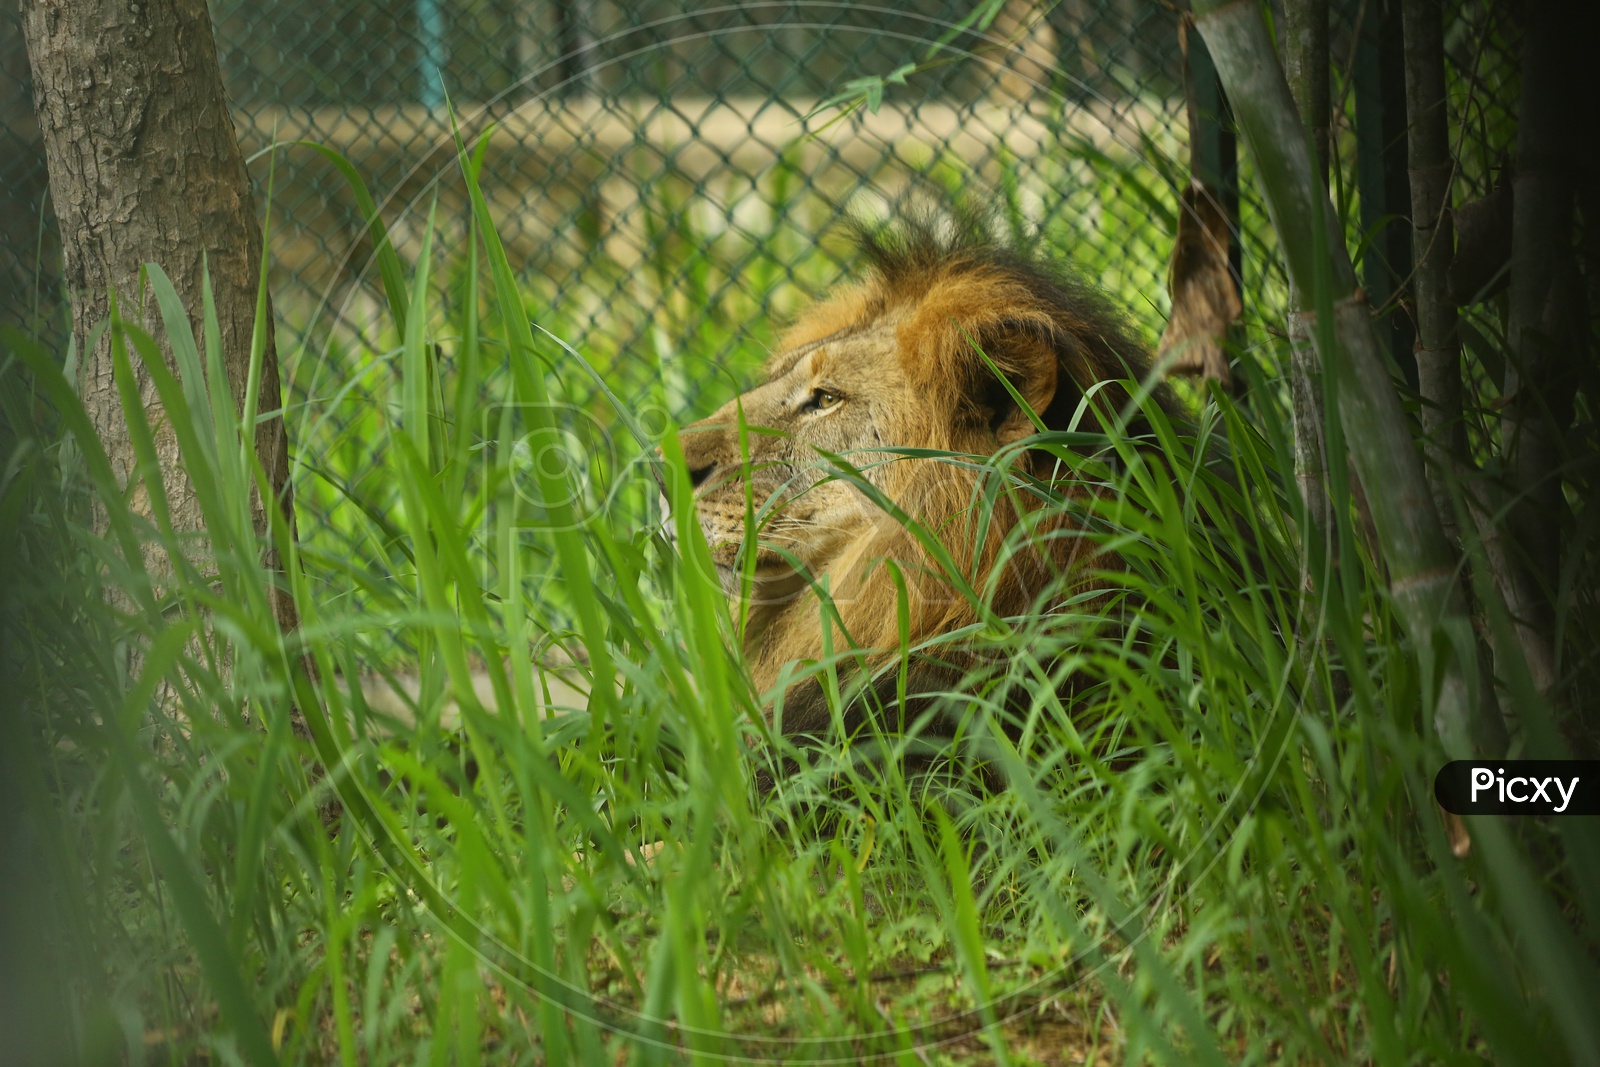 Lion or Wild Animal In a Zoo